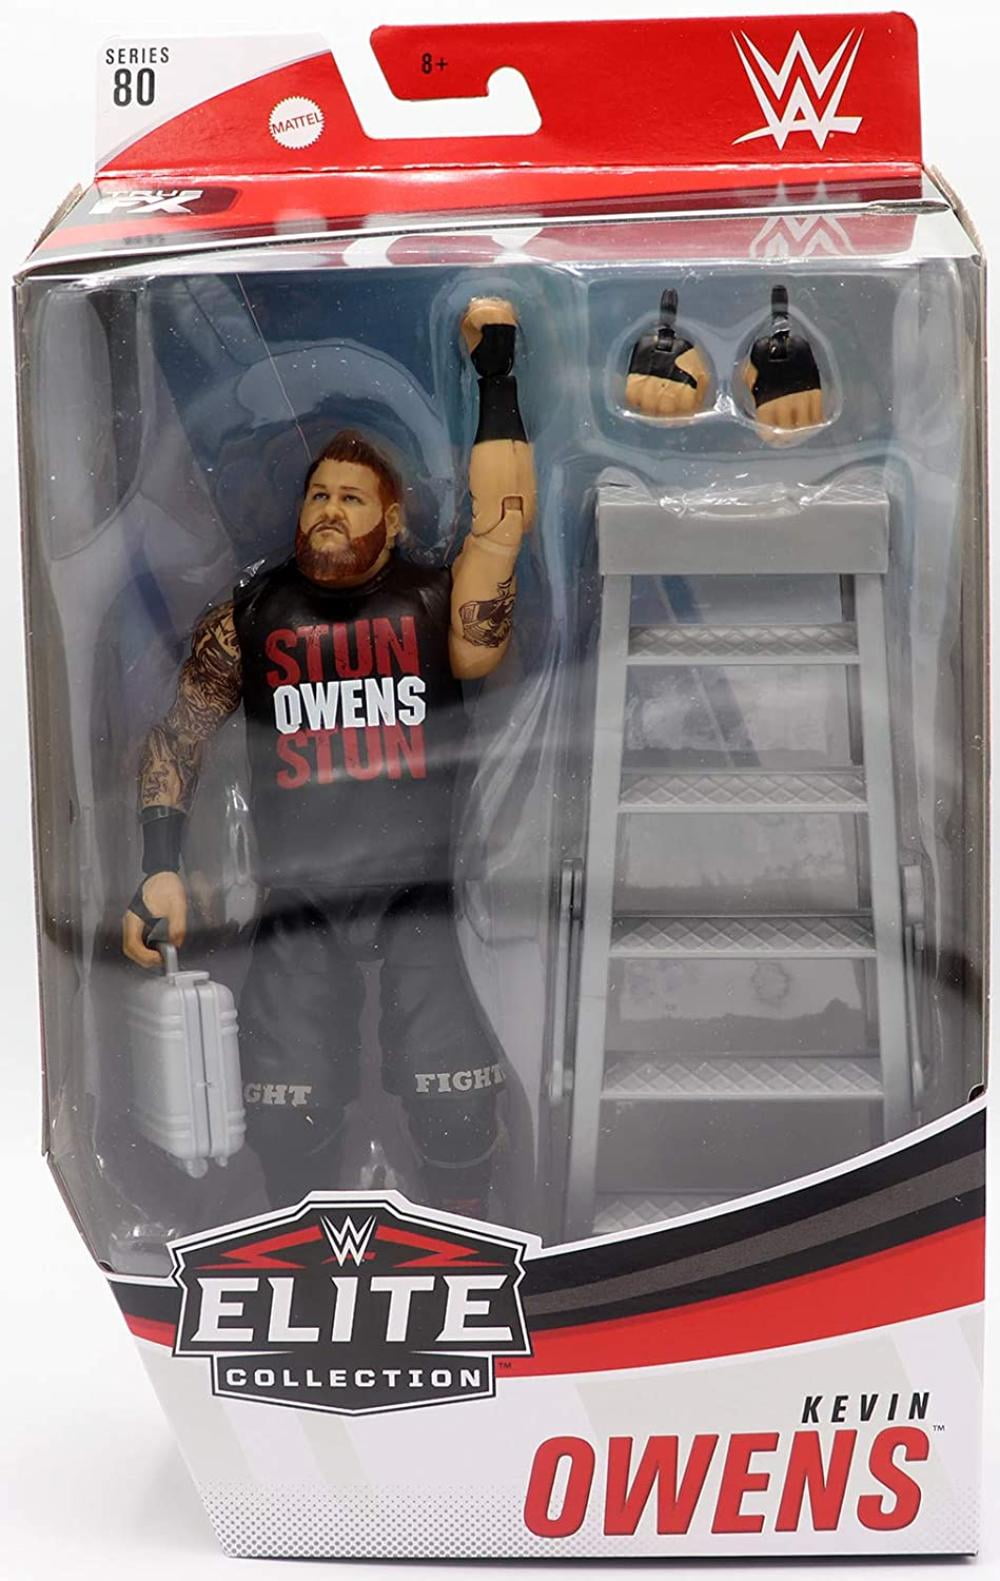 Ringside Kevin Owens Wwe Elite 80 Mattel Toy Wrestling Action Figure Includes Interchangeable Hands Briefcase Ladder Accessories By Visit The Ringside Store Walmart Com